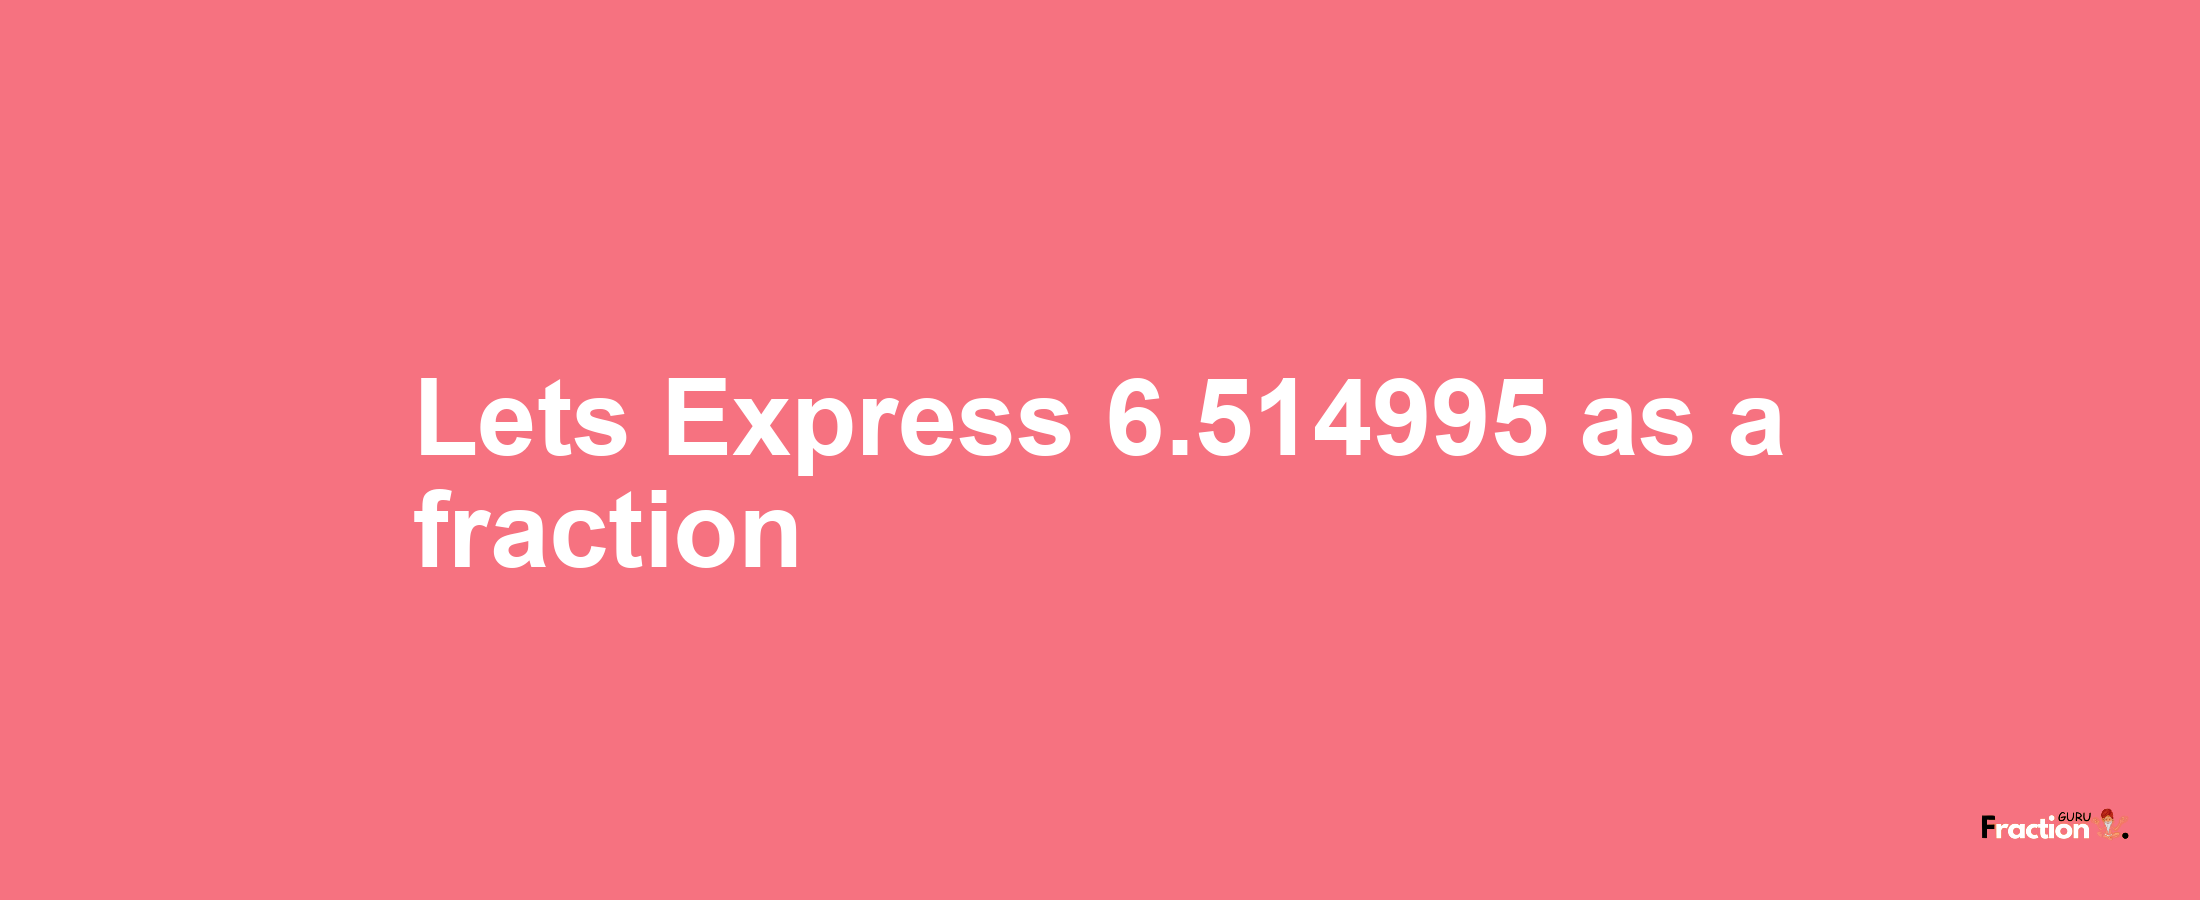 Lets Express 6.514995 as afraction